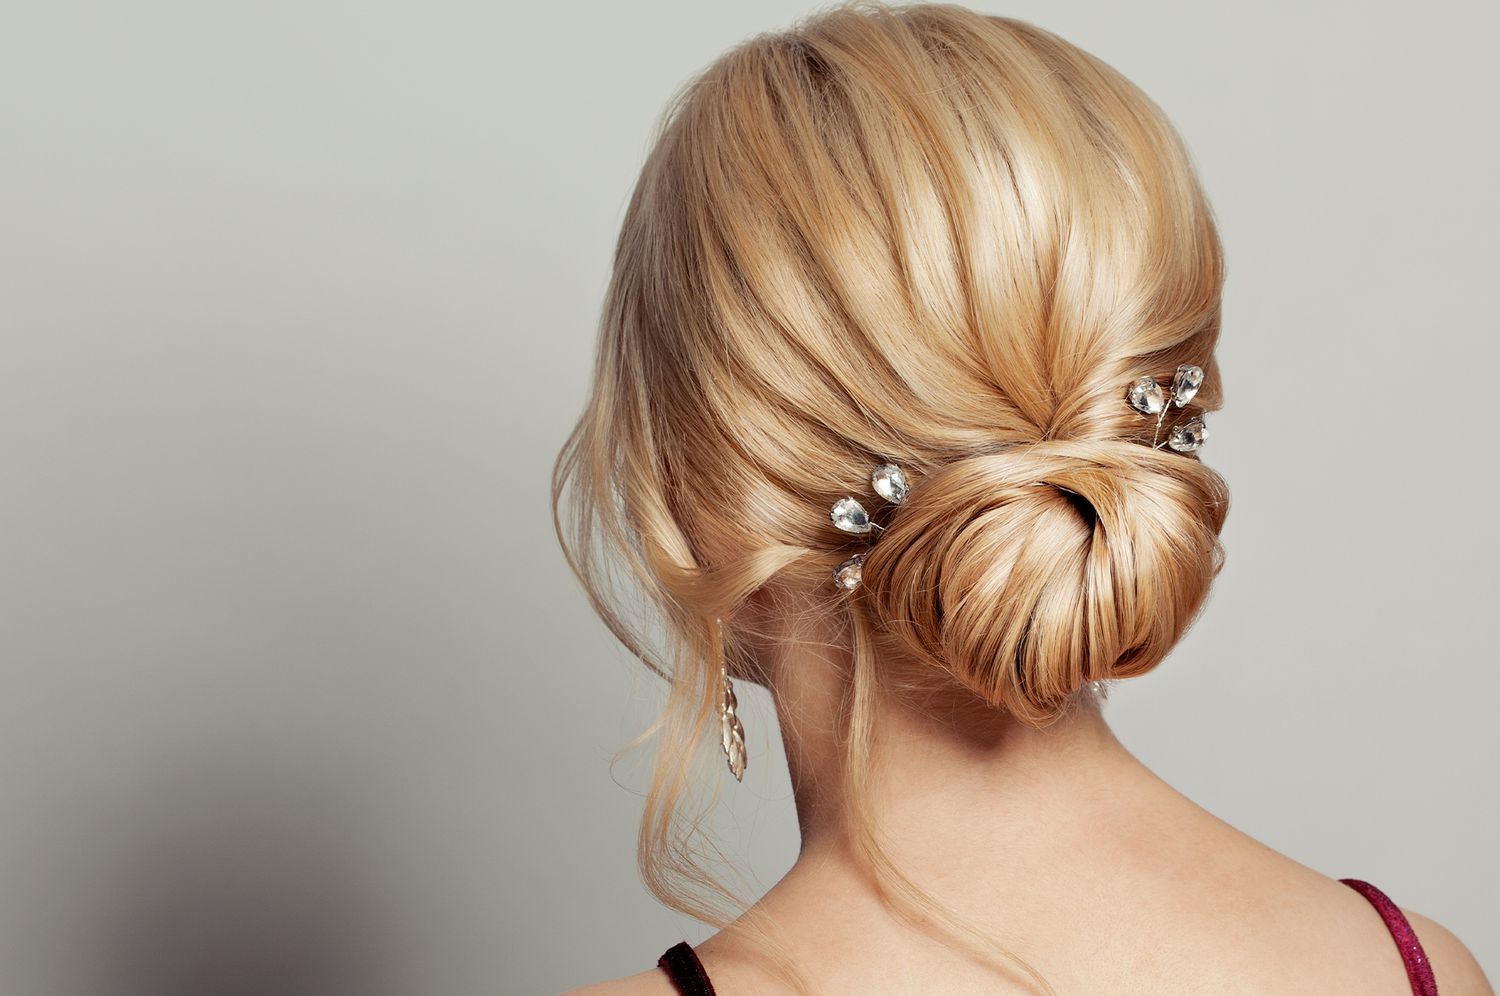 How to Do a Twisted Chignon Hairstyle | Martha Stewart